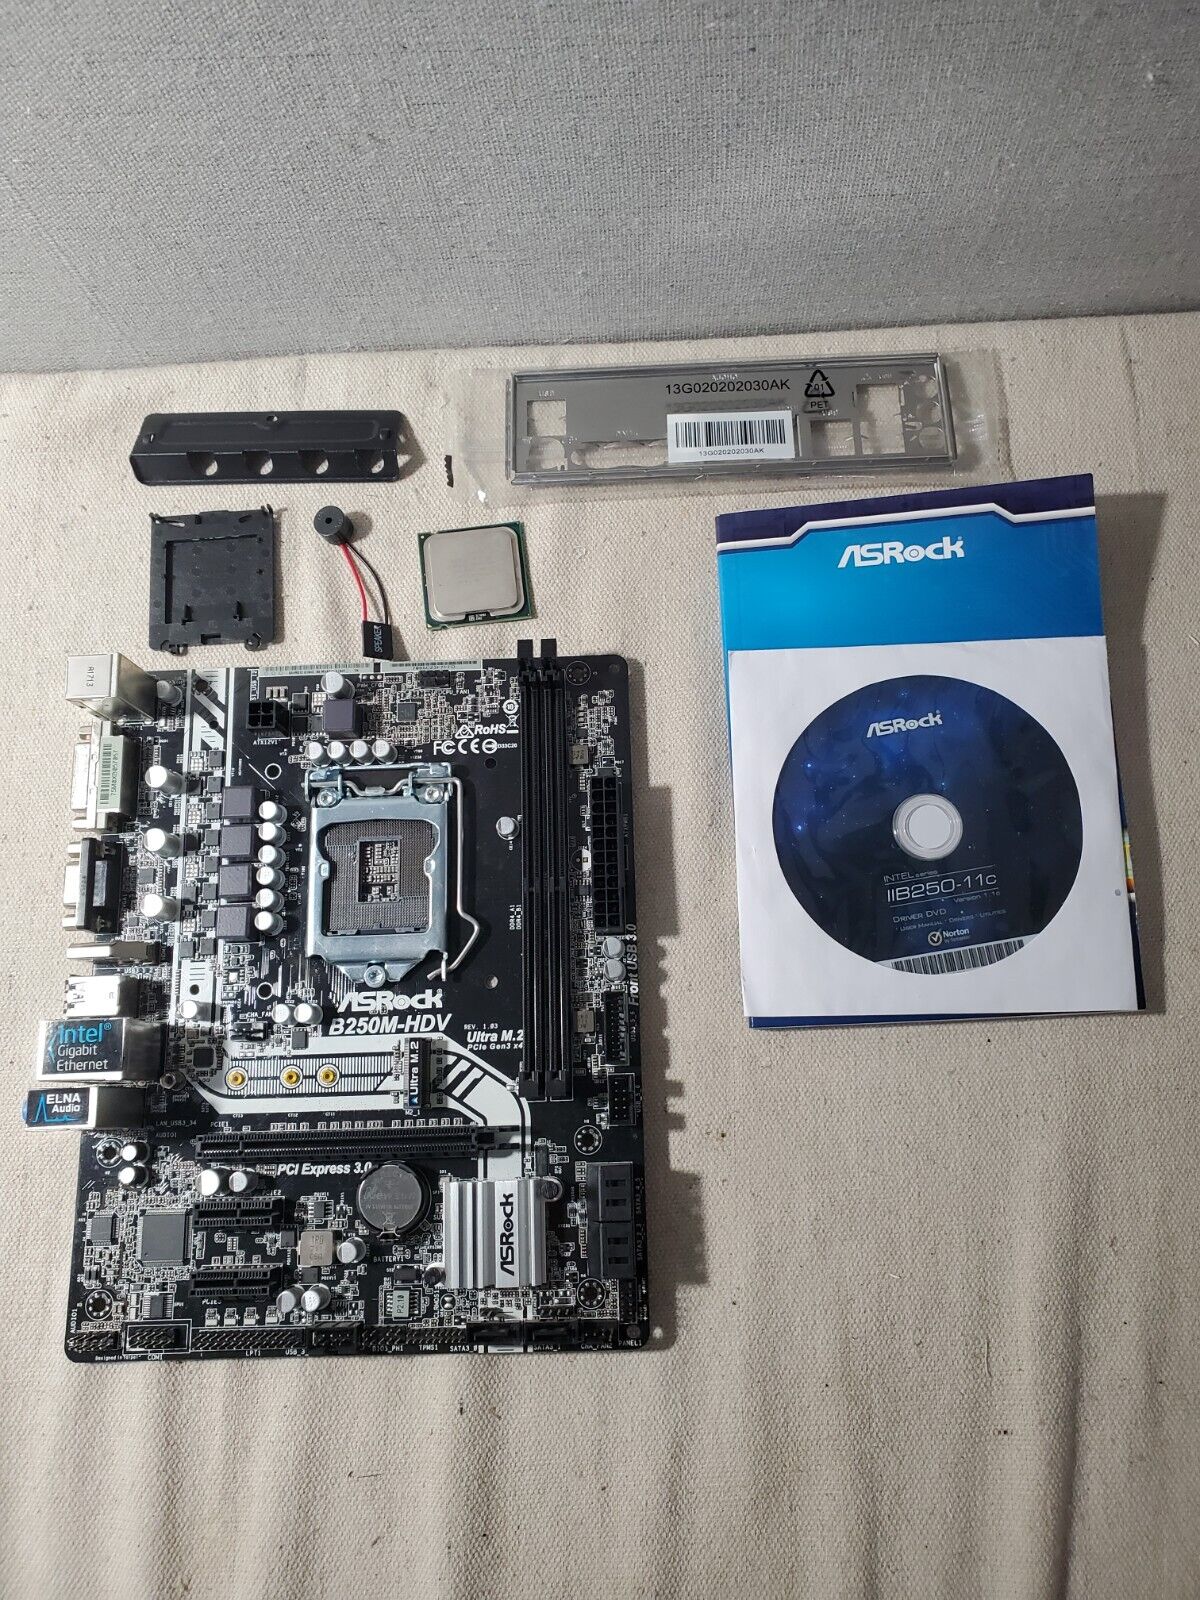 Asrock B250M-HDV Motherboard with Intel Core 2 DUO